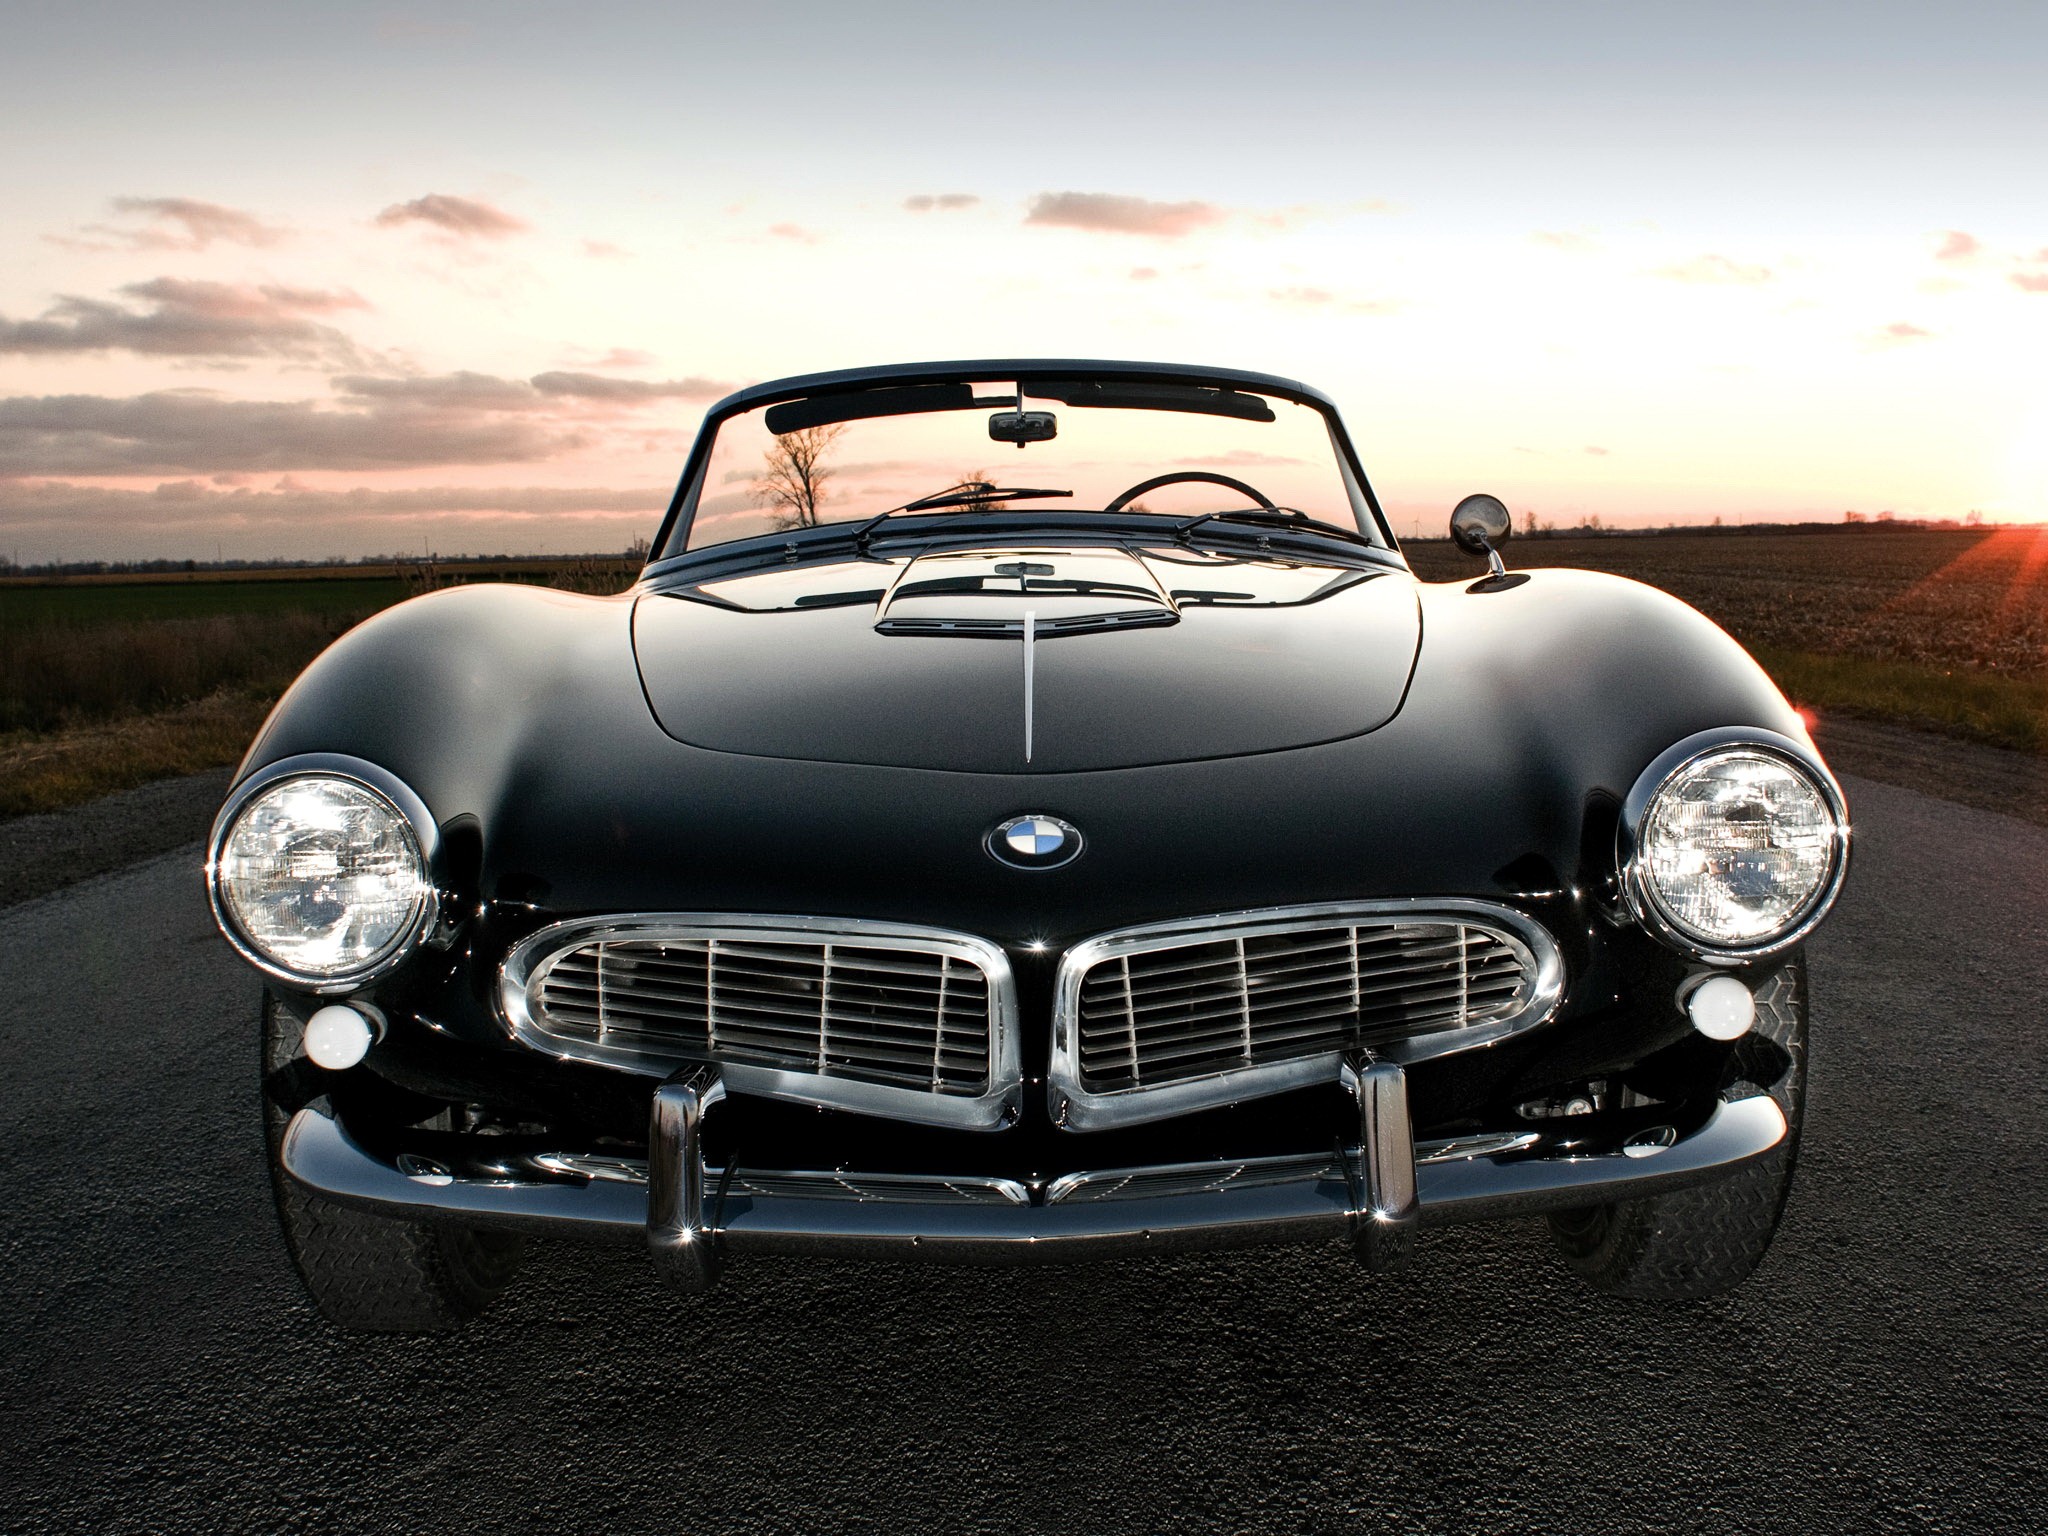 bmw, Cars, Old, Cars Wallpaper